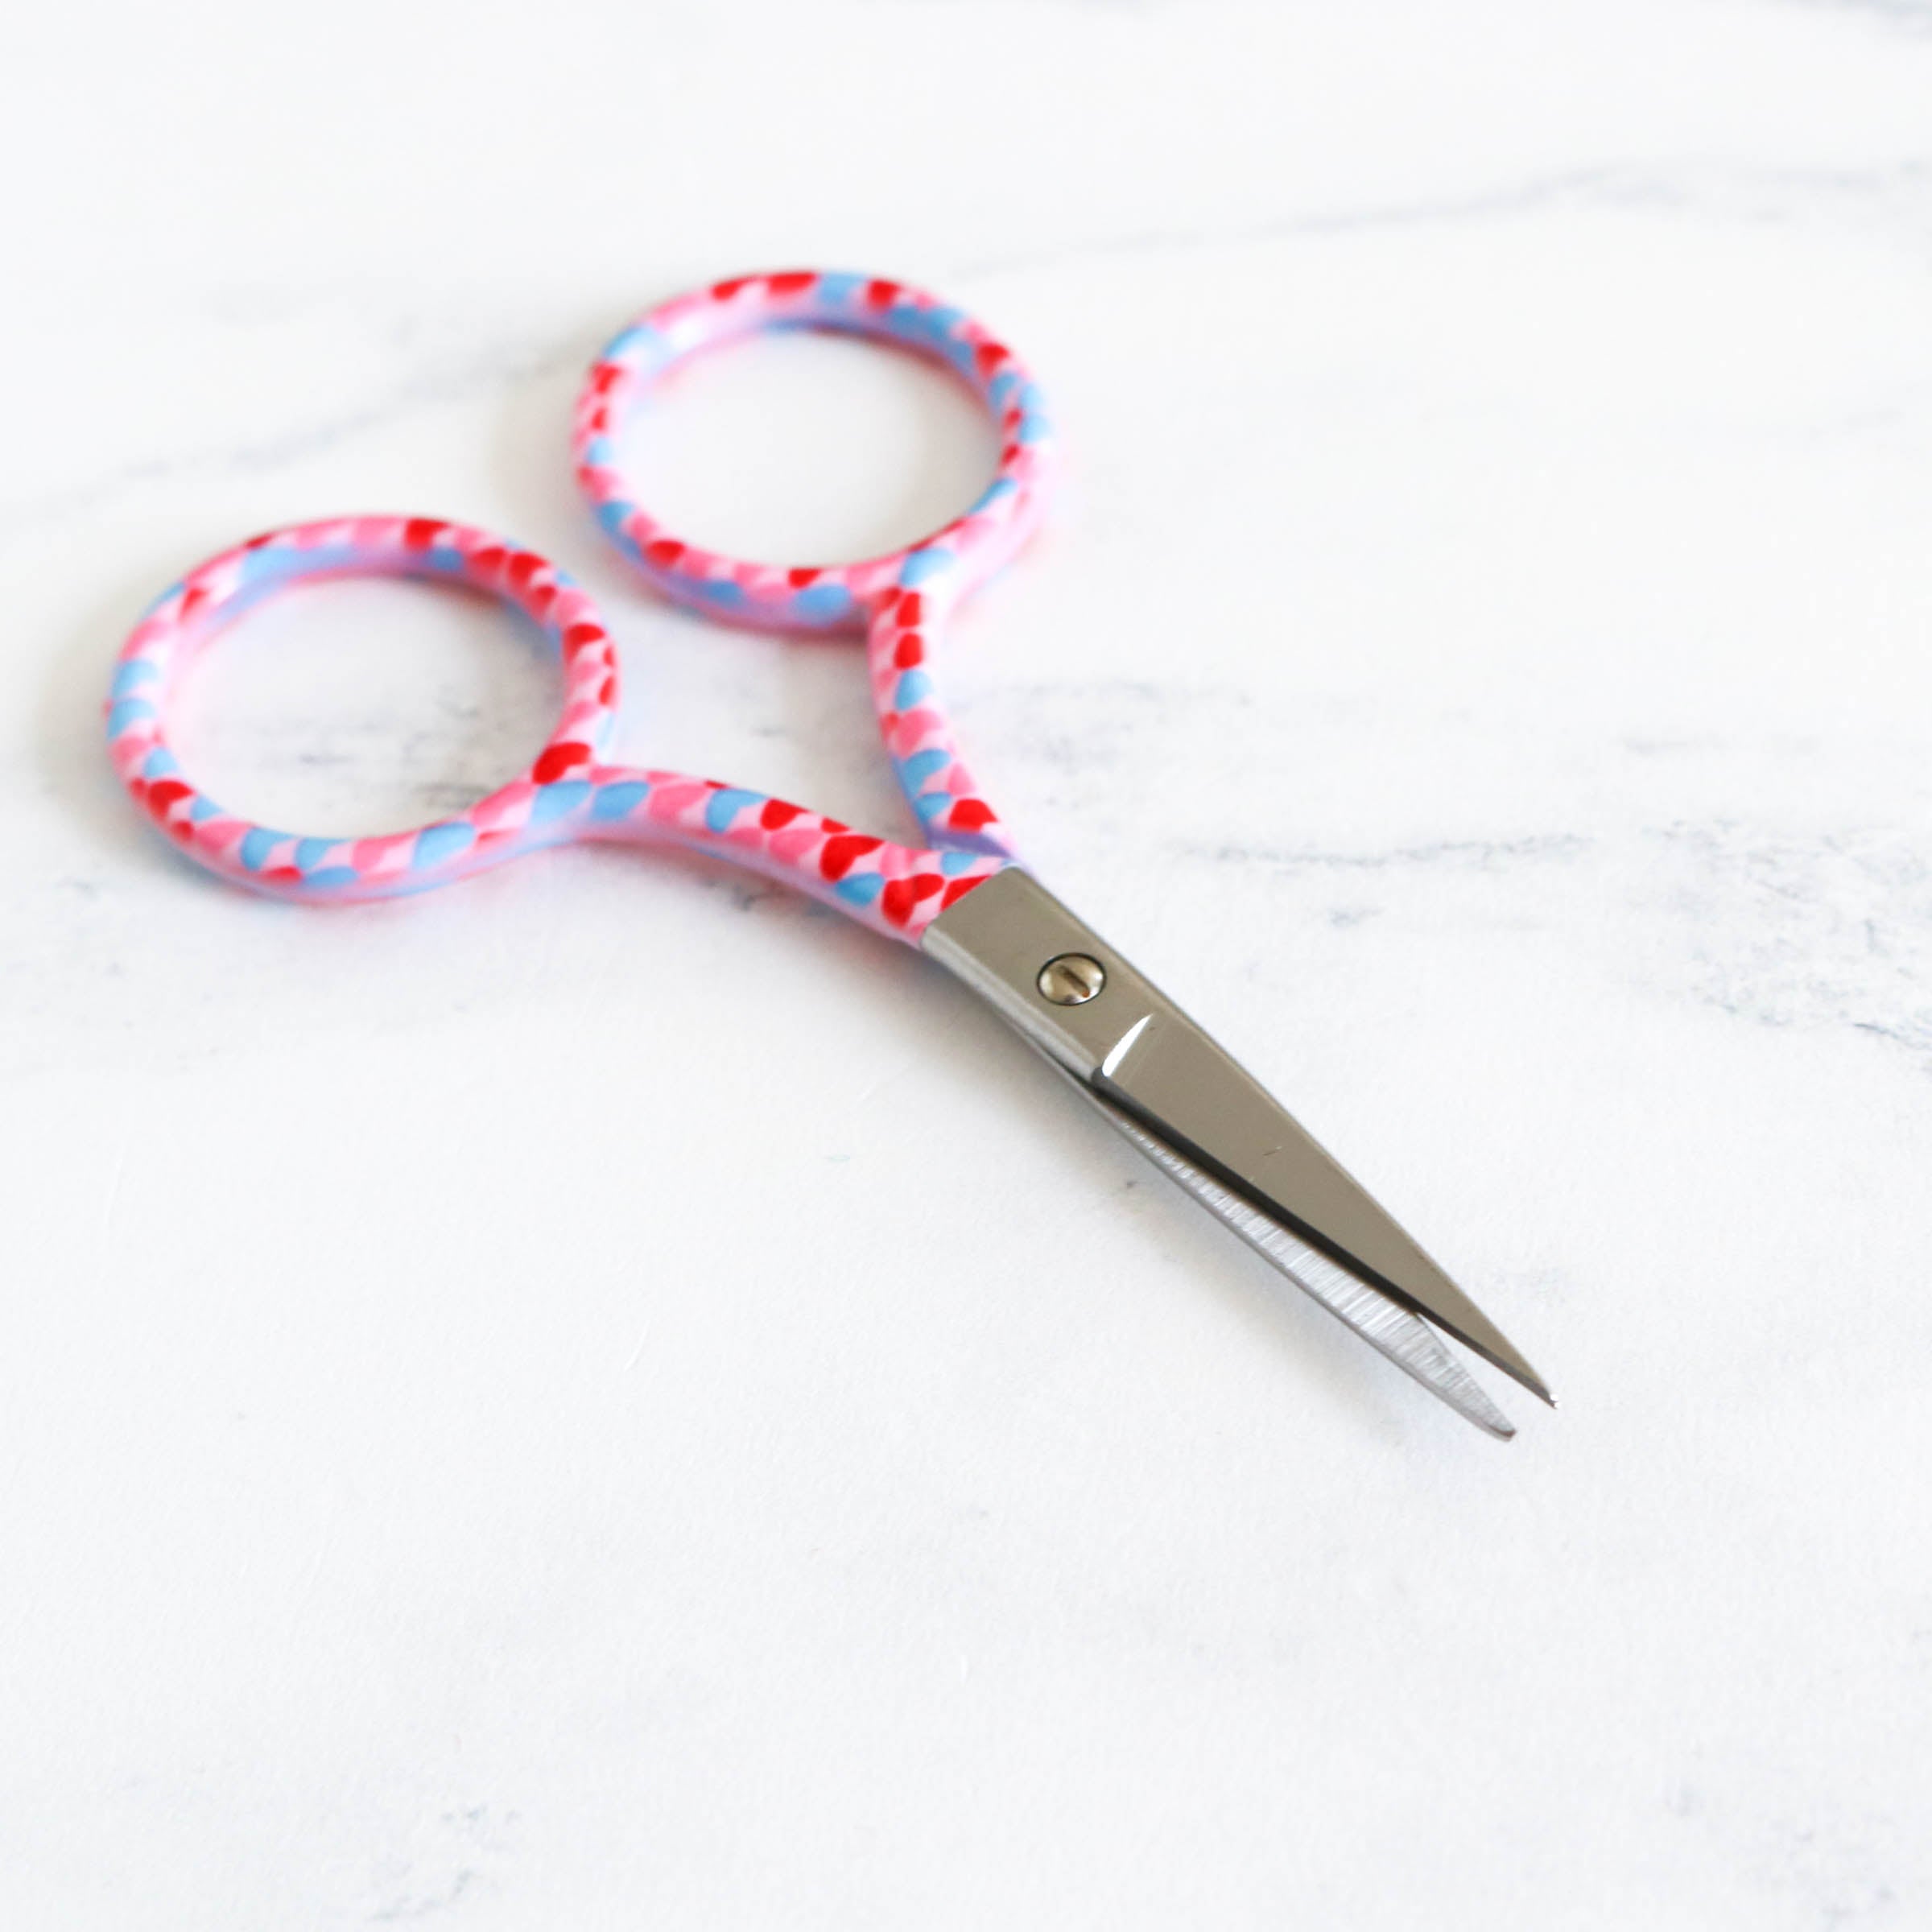 Embroidery Scissors. Decorative Scissors. Vintage Look Scissors. Floral  Patterned Handles. 12cm Sewing, Knitting, Cross Stitch. Gift for Her 